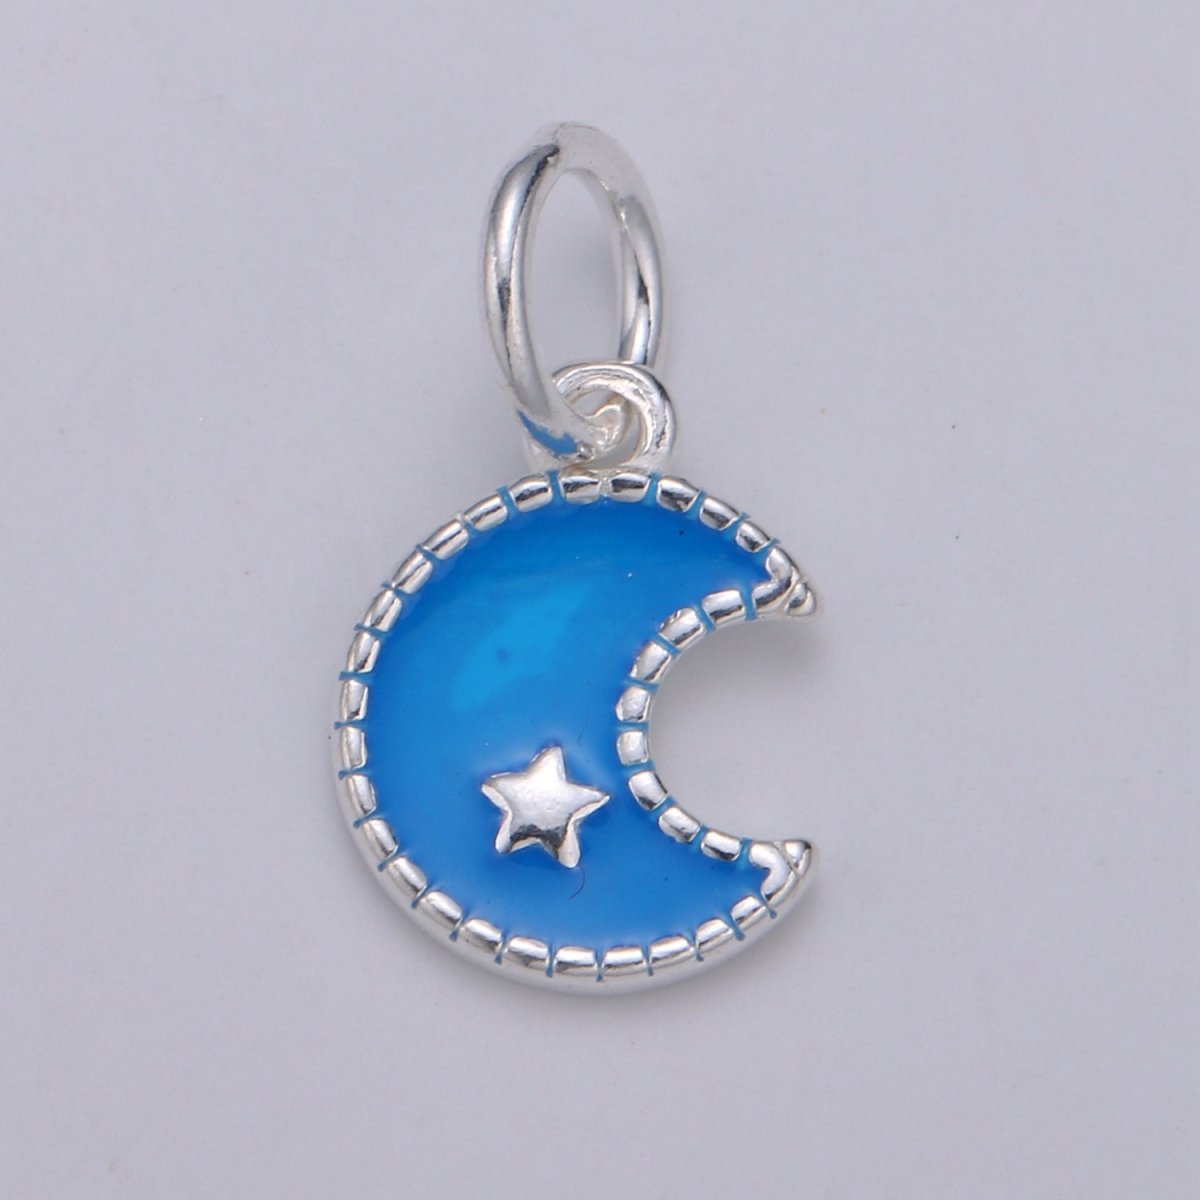 8.5mm Sterling Silver Moon Charm - 925 Silver Crescent Moon Charm - Silver Celestial Charm - Moon Pendant - Silver Star charm Necklace SL-021 SL-022 - DLUXCA